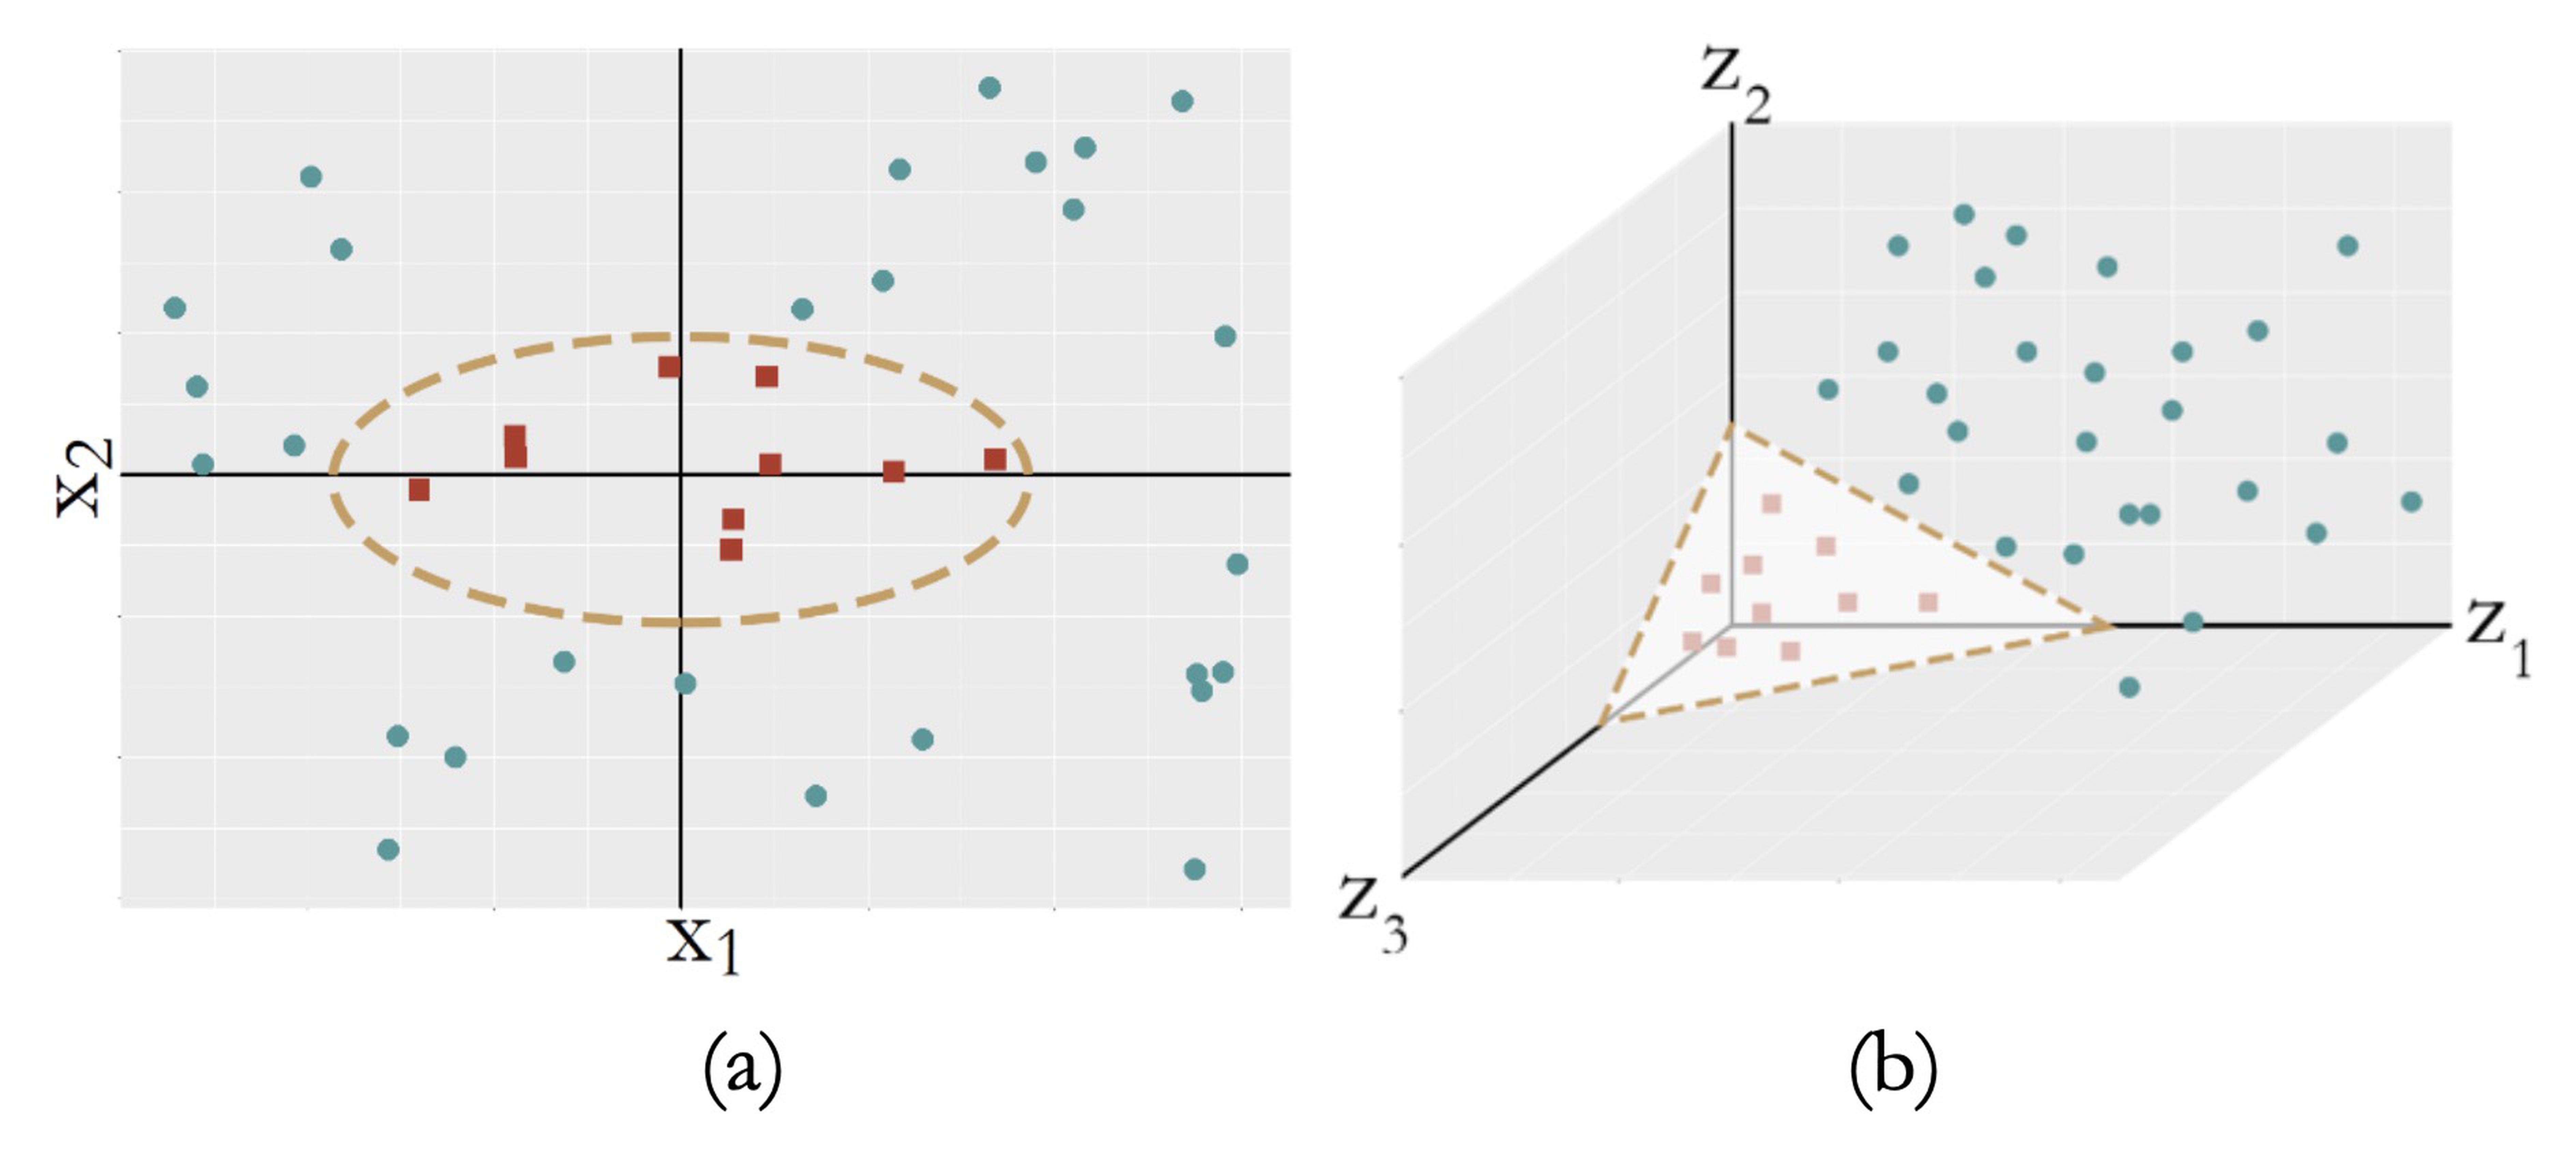 (a) A nonseparable dataset; (b) with the right transformation, (a) becomes linearly separable